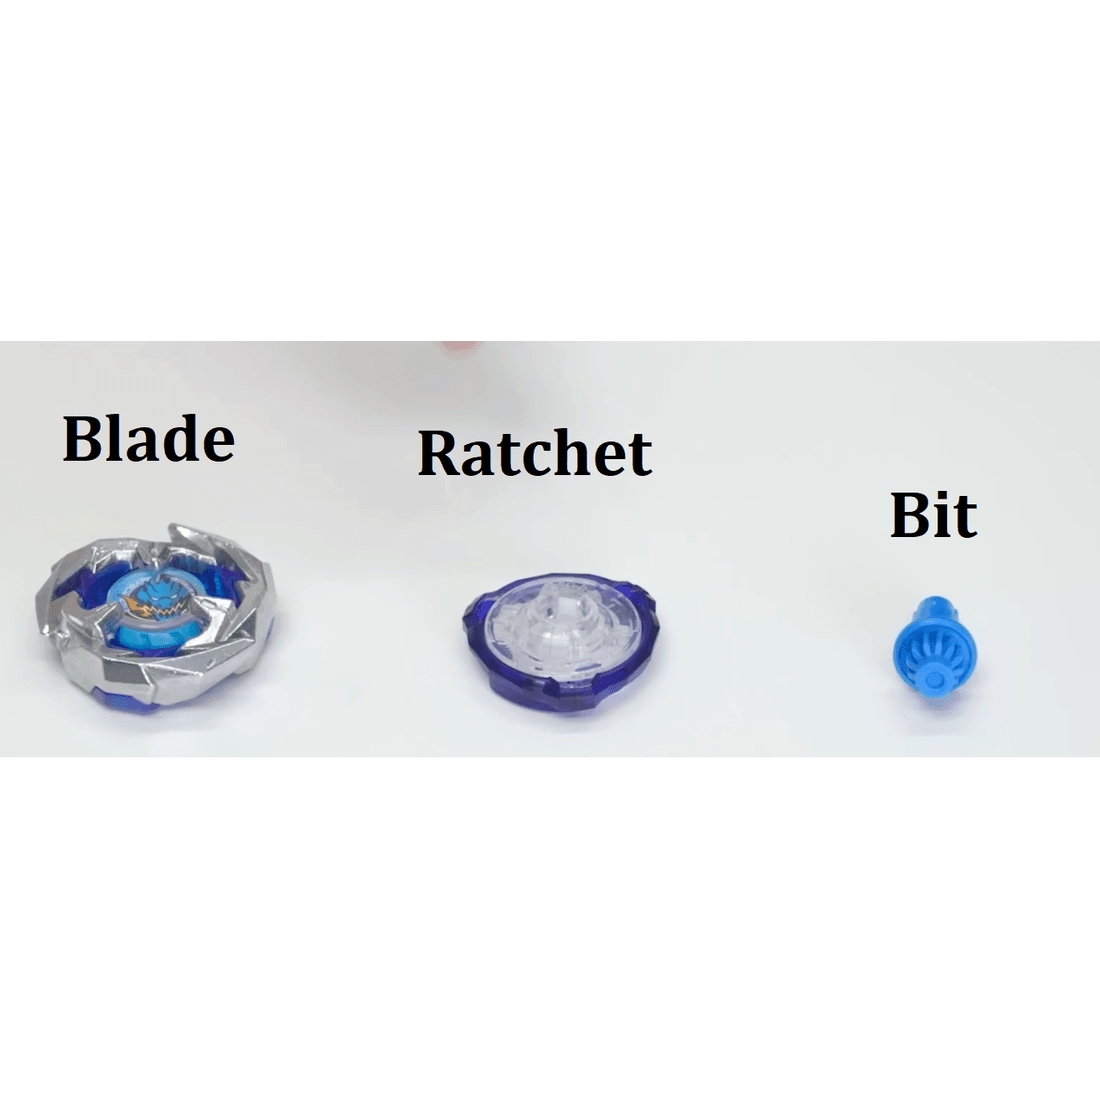 Anatomy and buying guide of beyblade x